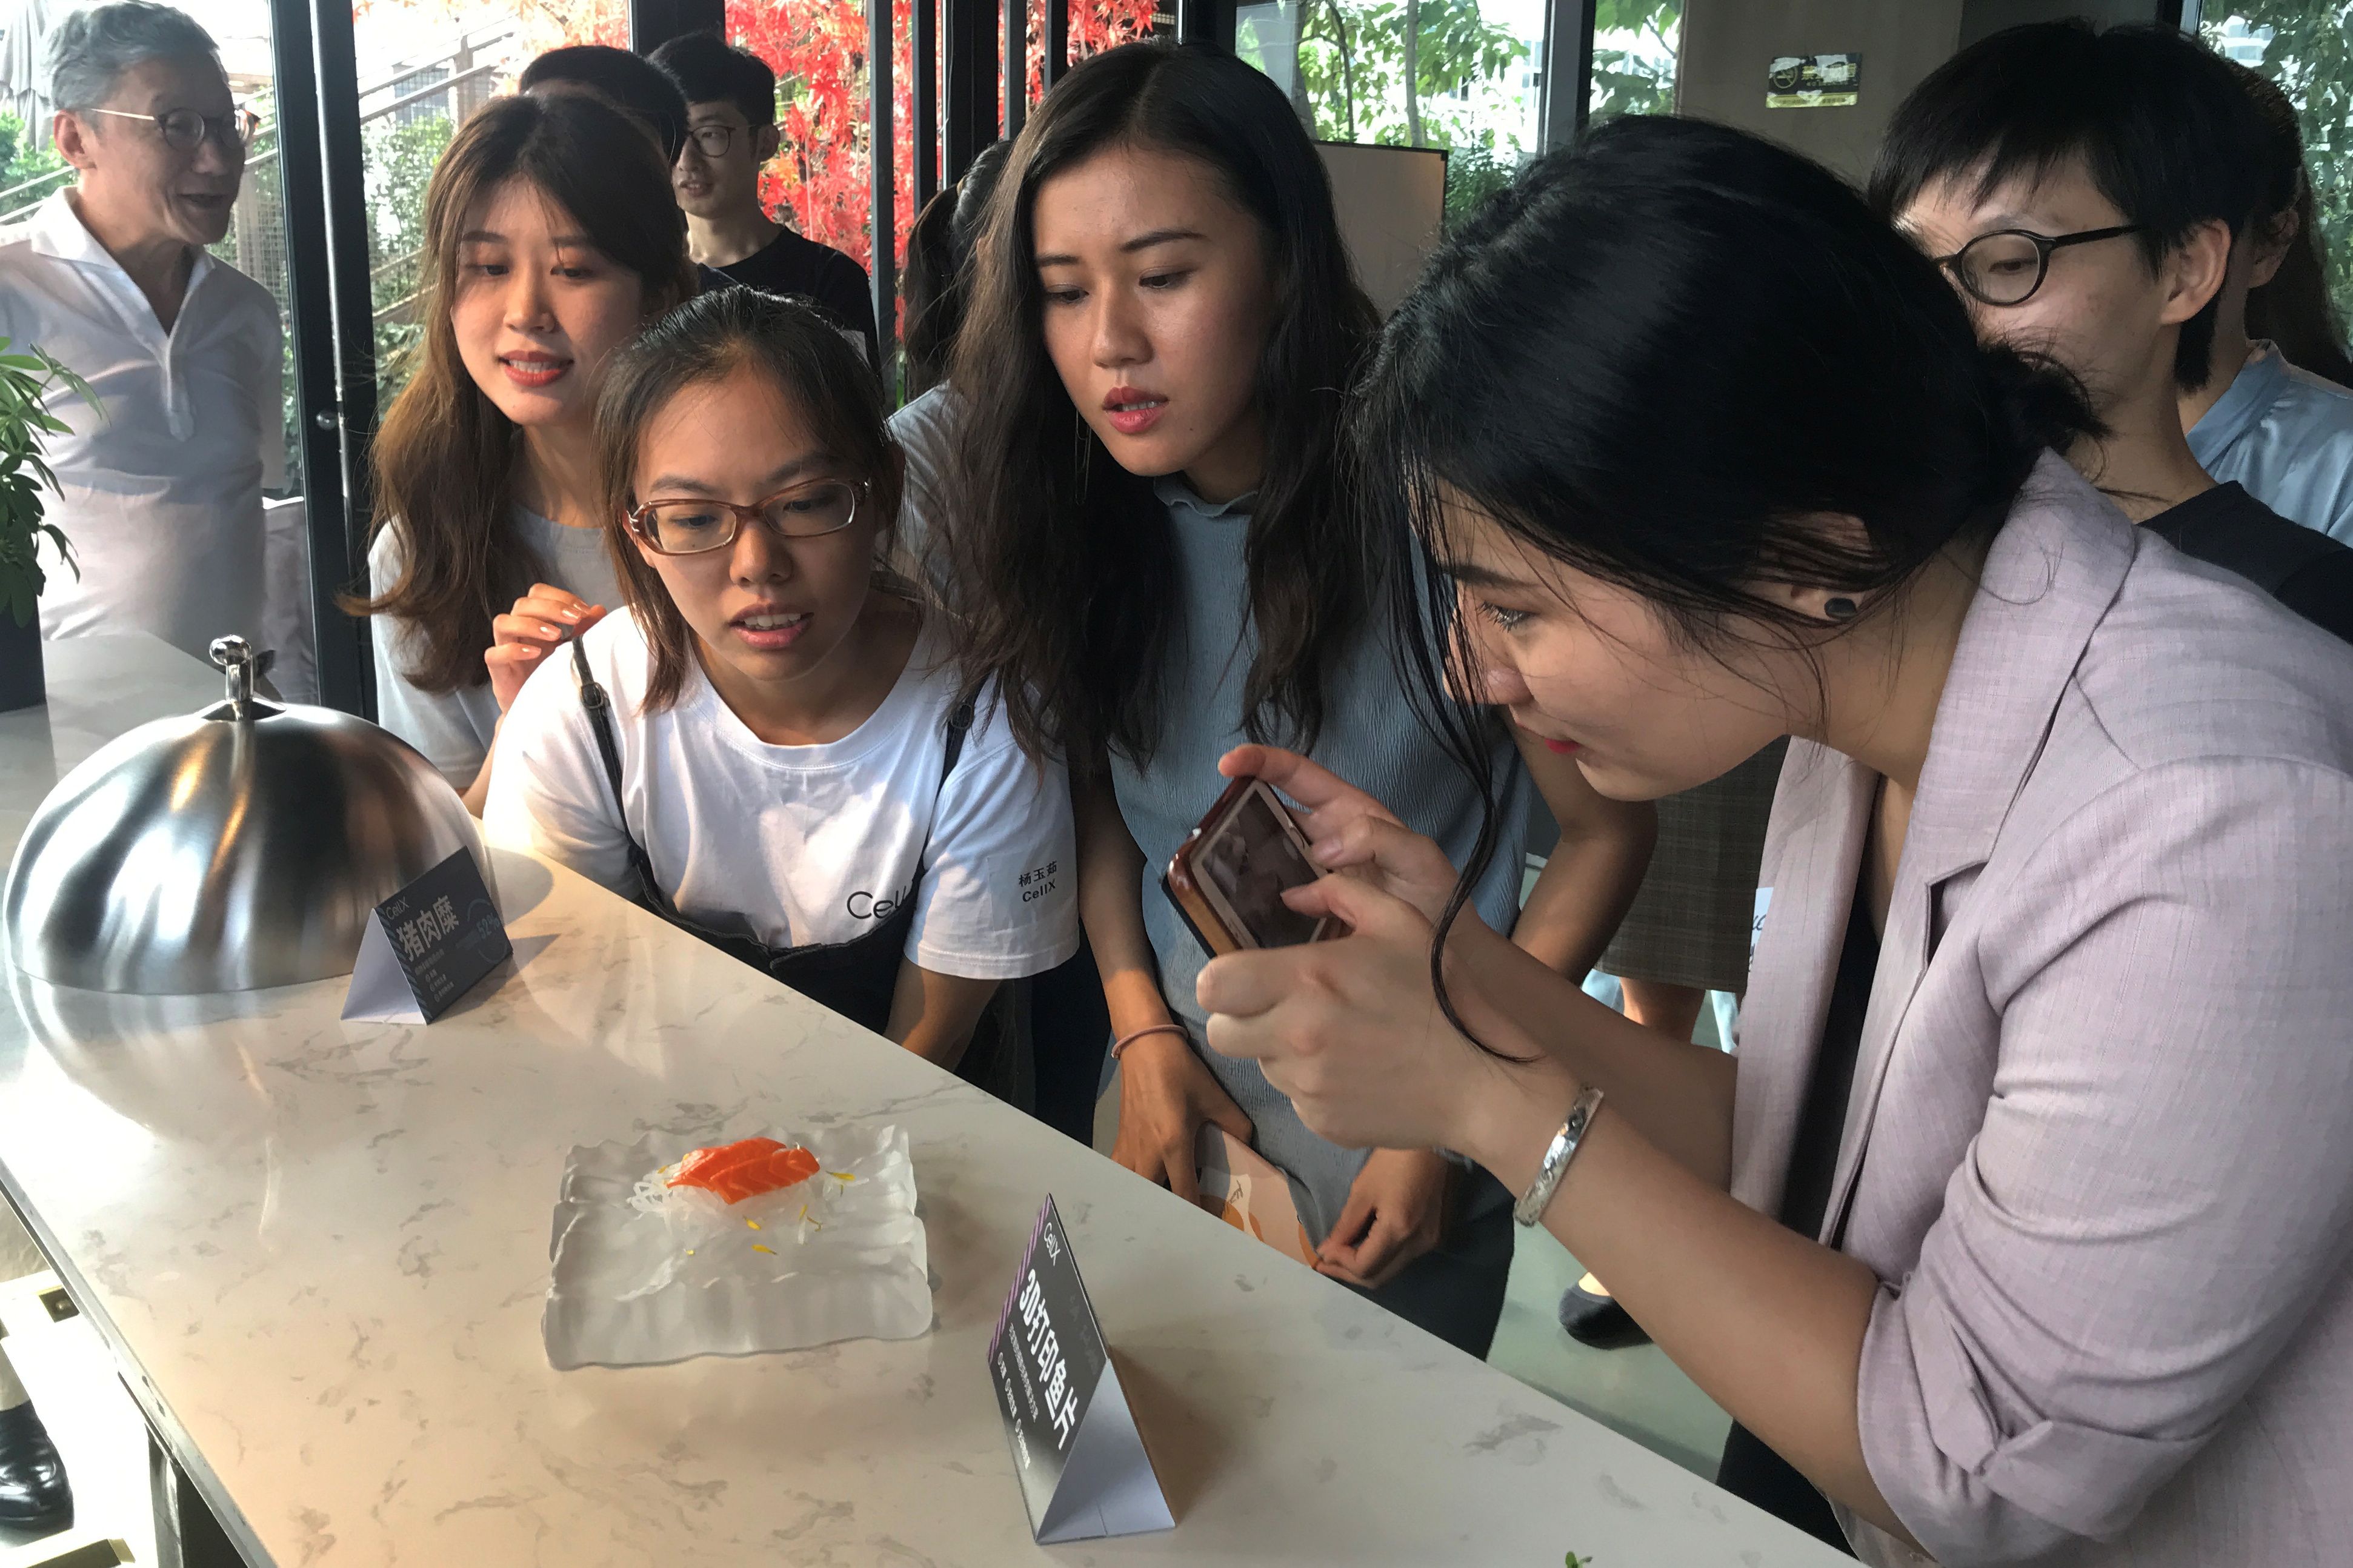 Guests look at a 3D printed salmon slice displayed during an event by CellX in Shanghai